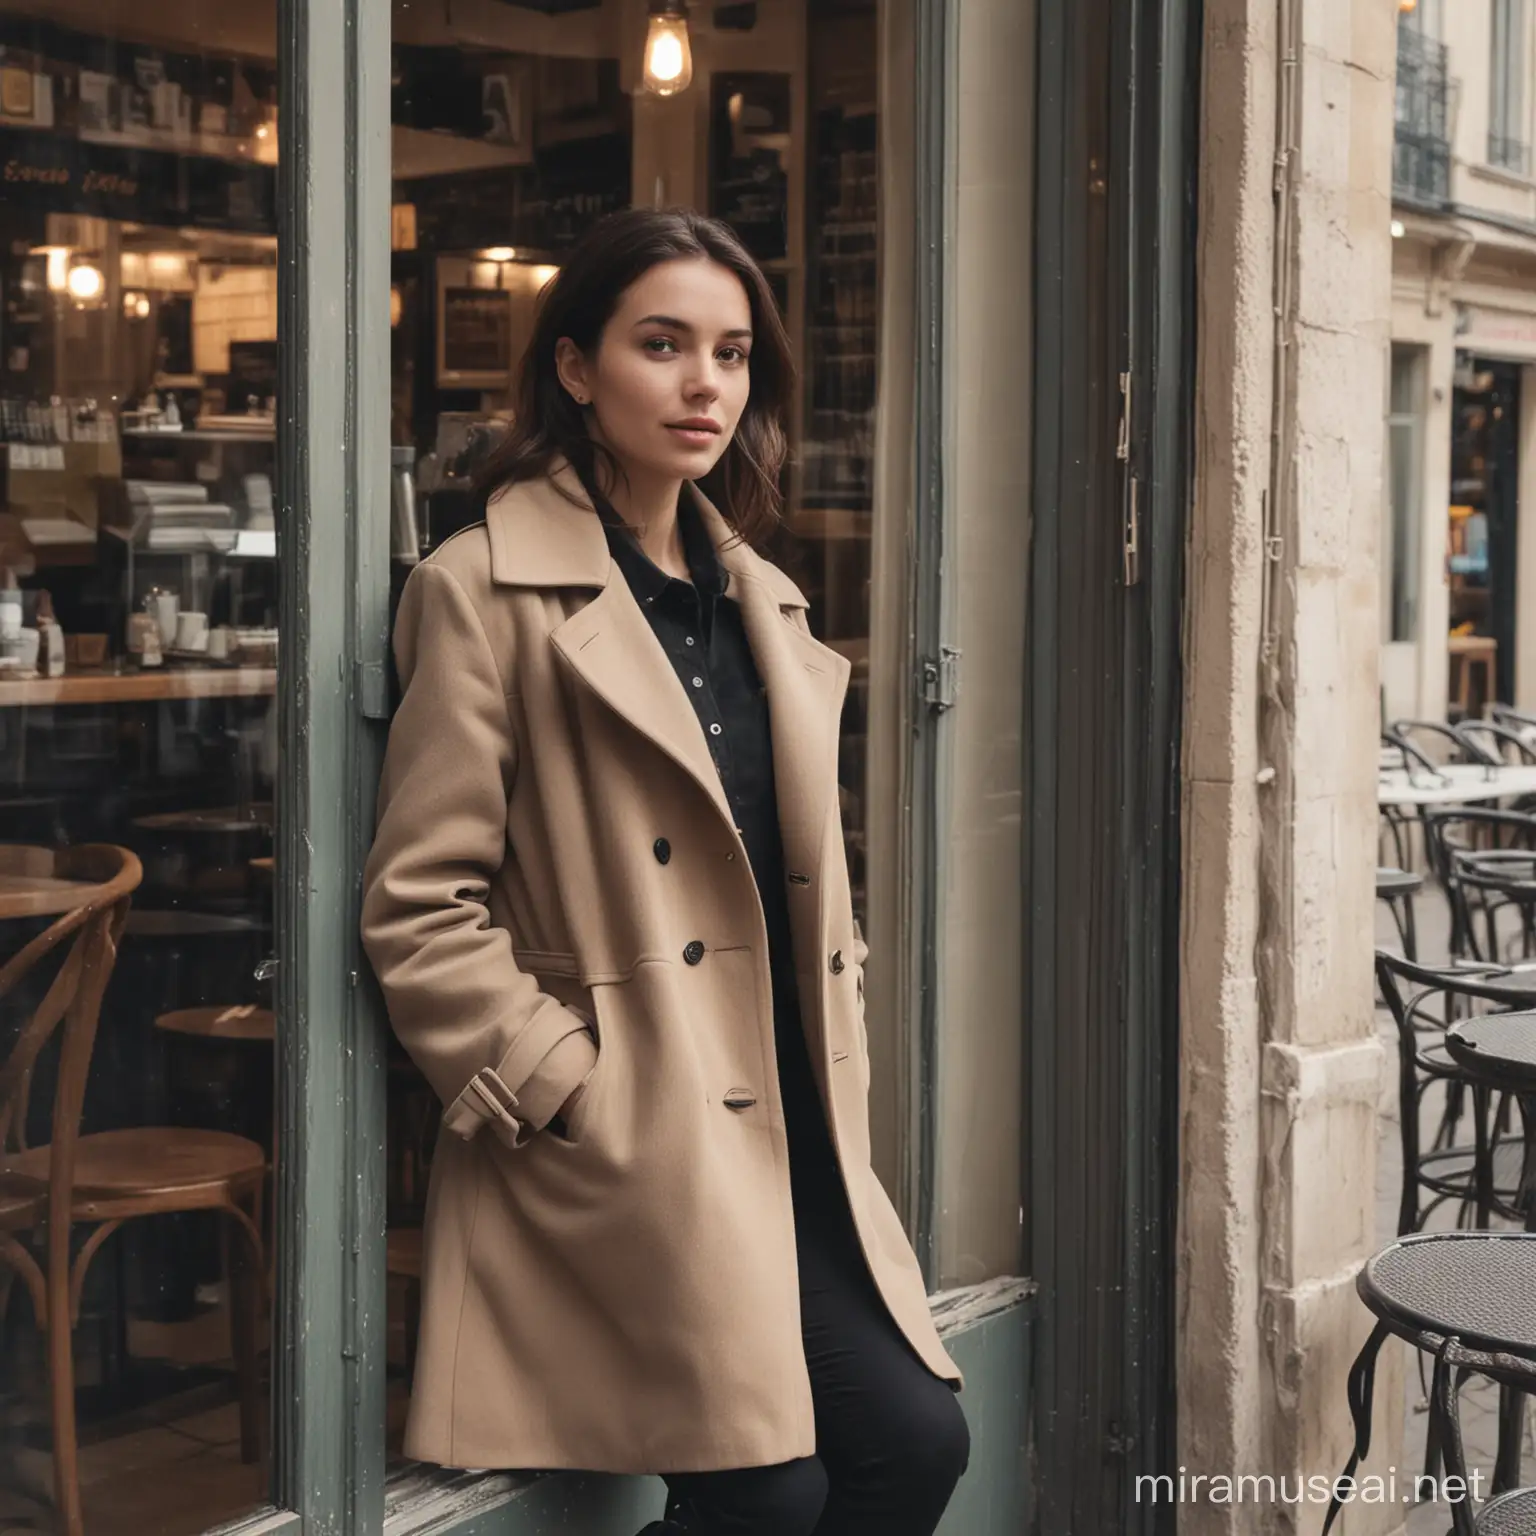  a mysterious woman sitting inside a French café, wearing a coat with her hands in her pockets, and looking out of a large window